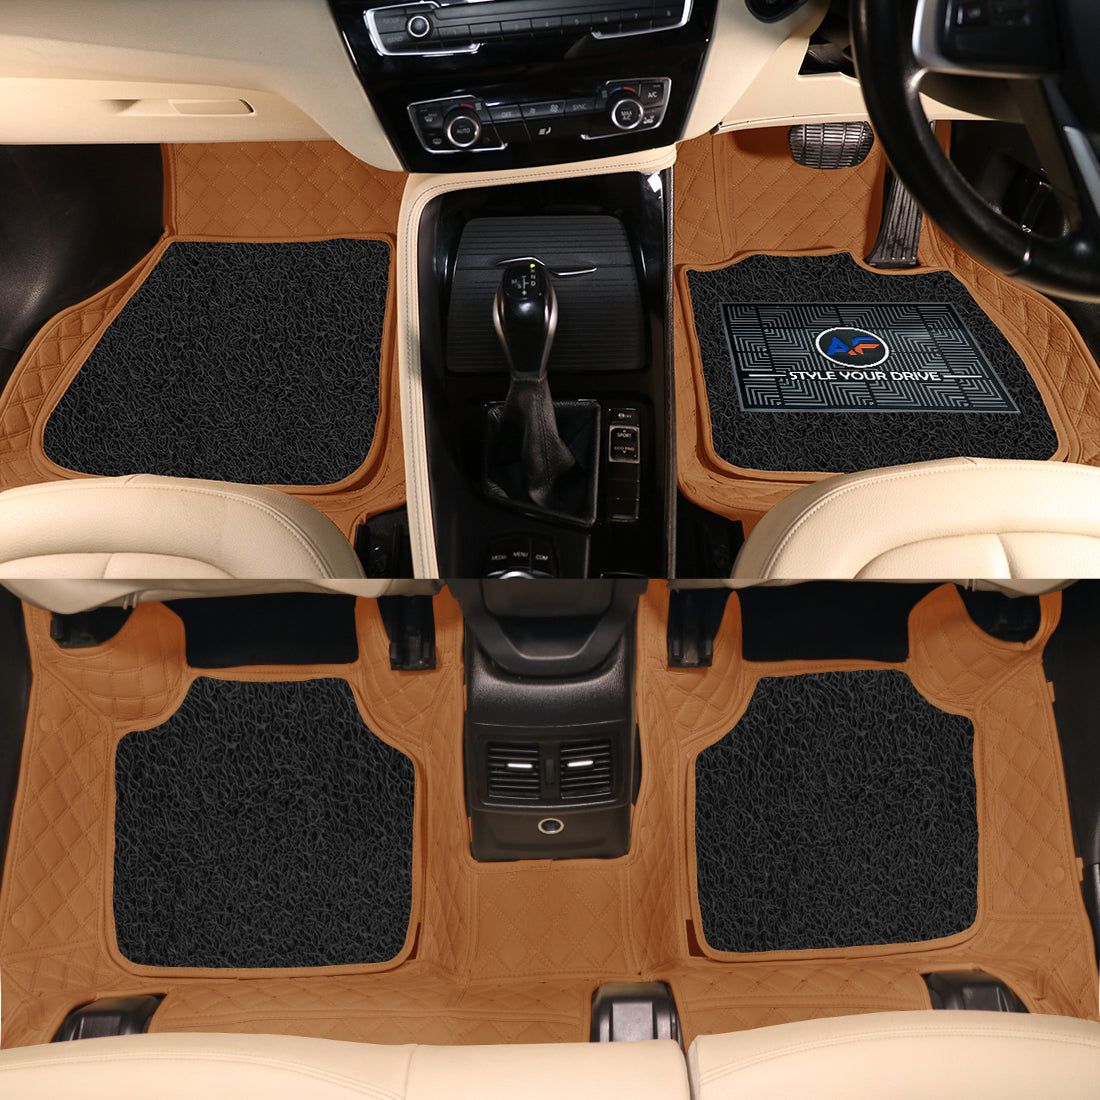 KIA Carens (6 Seater) 2022 7D Luxury Car Mat, All Weather Proof, Anti-Skid, 100% Waterproof & Odorless with Unique Diamond Fish Design (24mm Luxury PU Leather, 2 Rows)